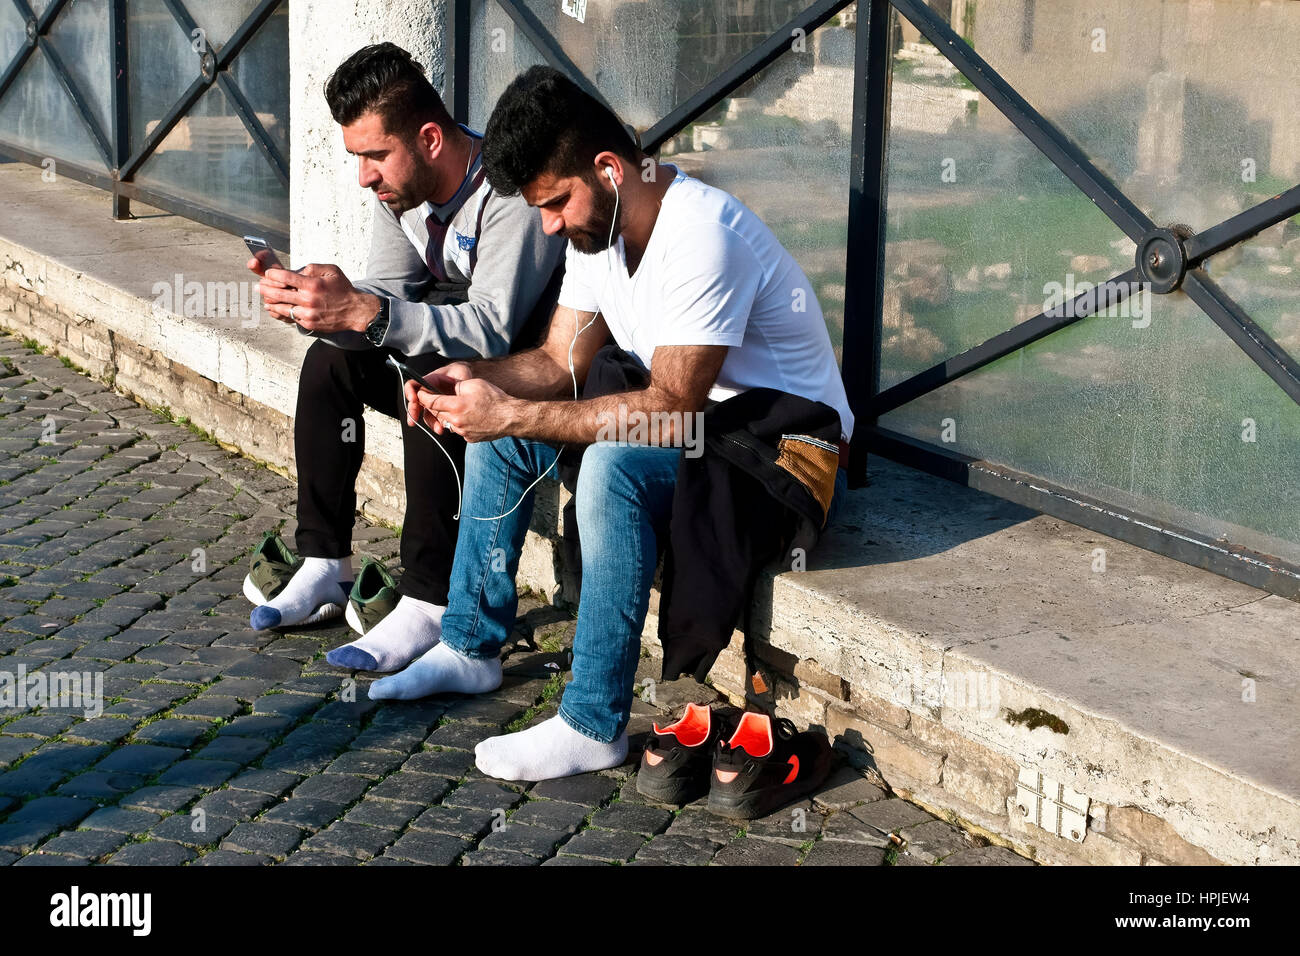 Two tourists friends using their smartphones, relaxing with their shoes off while visiting the Trajan’s roman forum. Rome, Latium, Italy, Europe, EU. Stock Photo